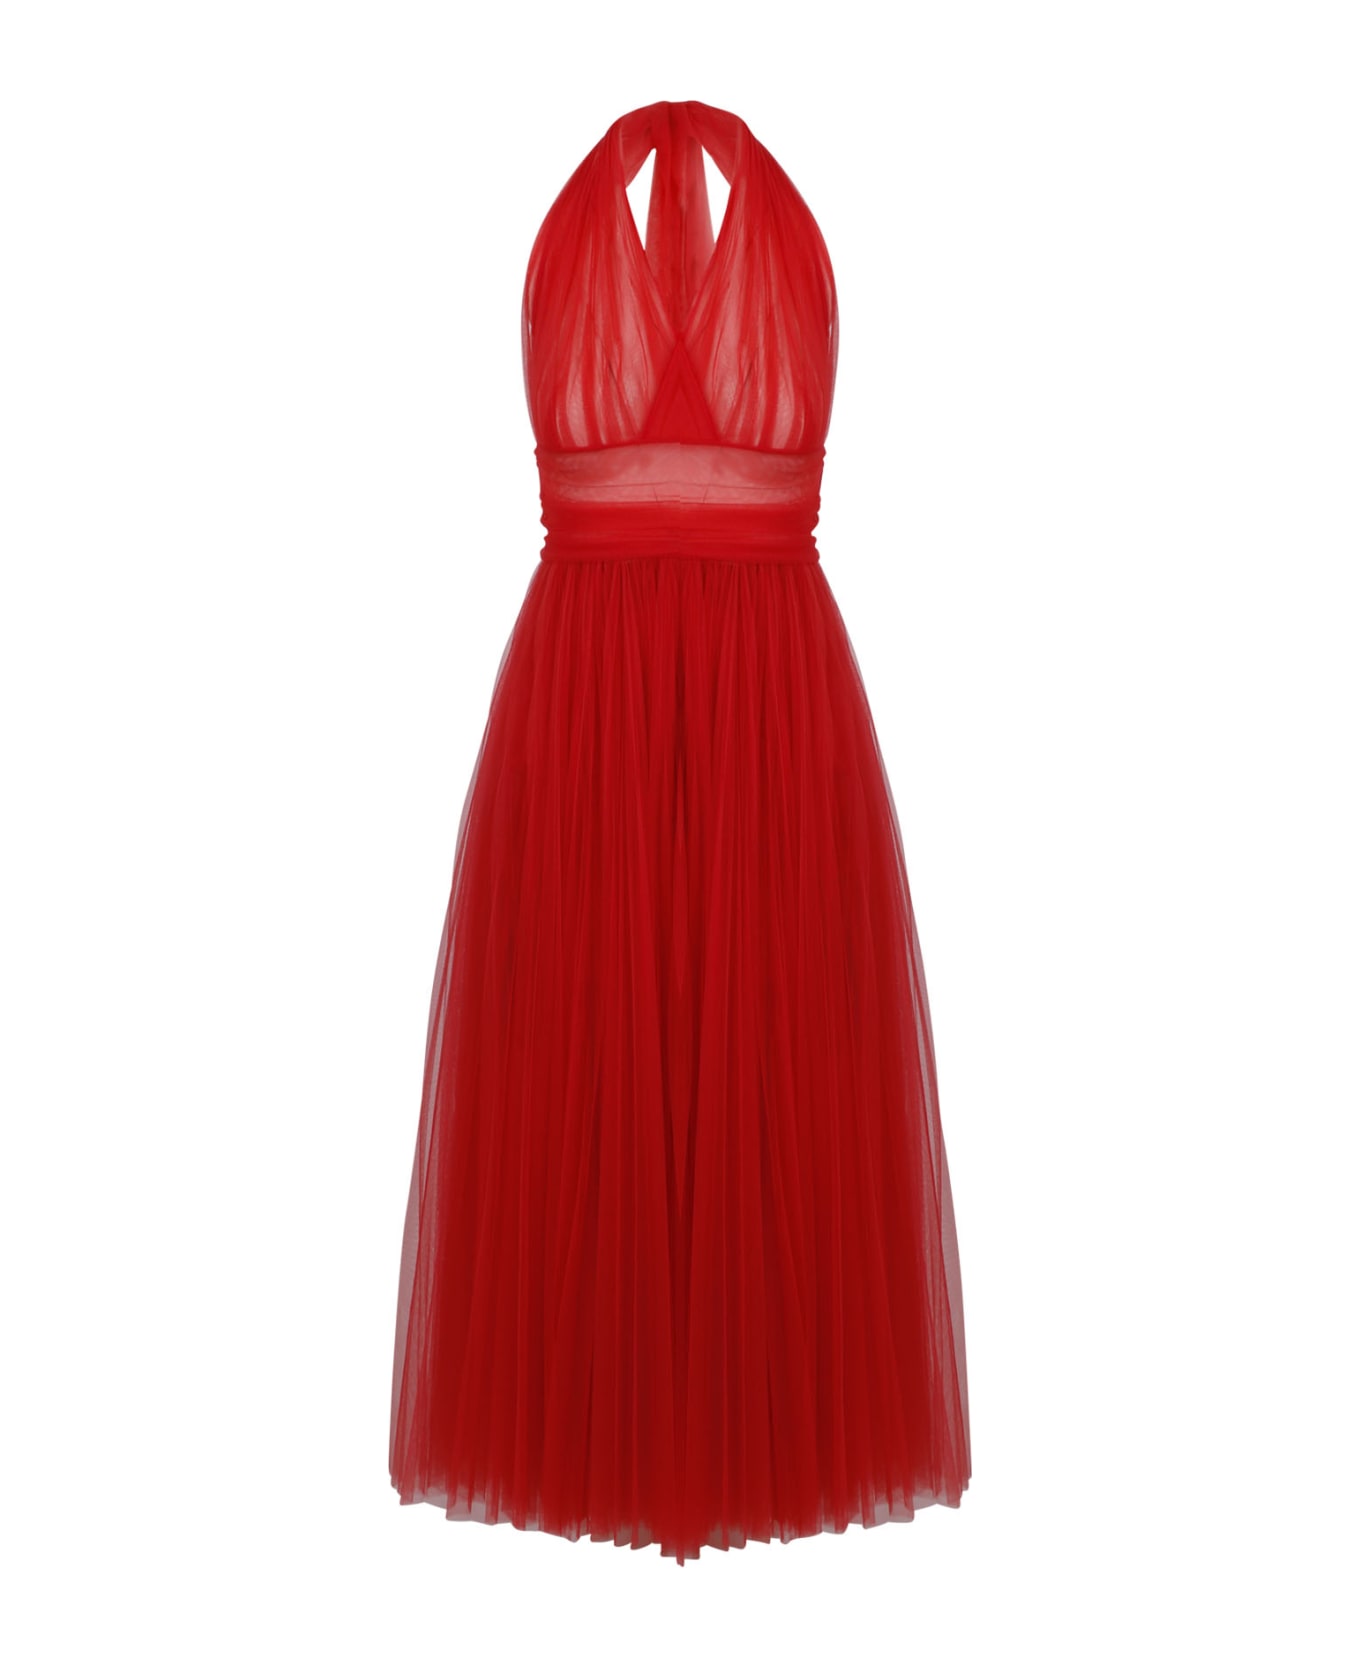 Dolce & Gabbana Pleated Tulle Dress - Red